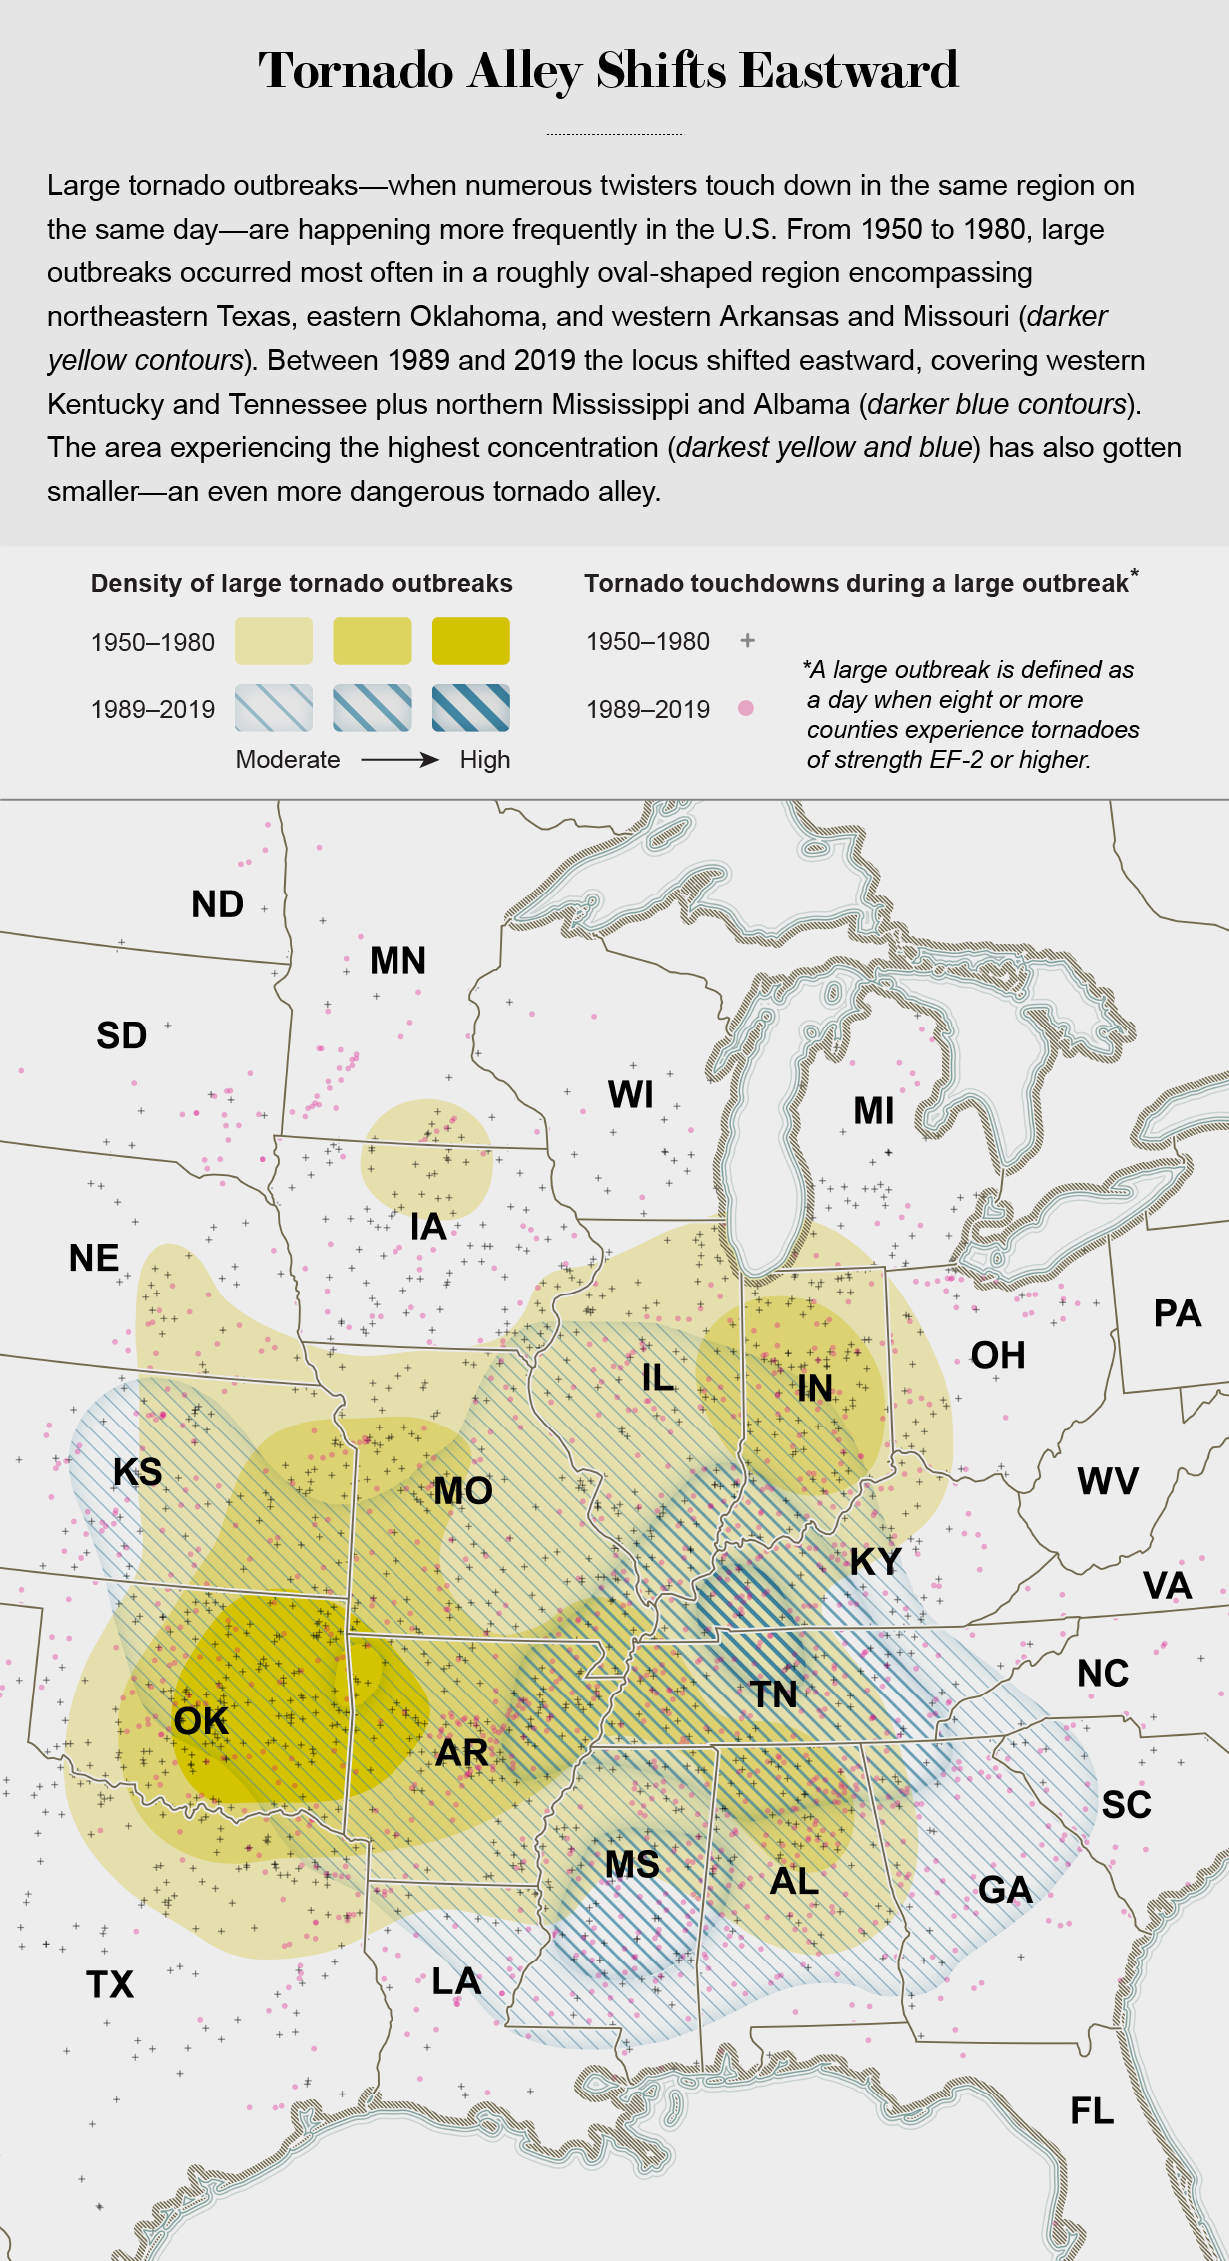 The map shows major tornado outbreak regions for two time intervals: 1950 to 1980 and 1989 to 2019. The area of ​​highest density moved east from Oklahoma and Arkansas to Kentucky and Tennessee.